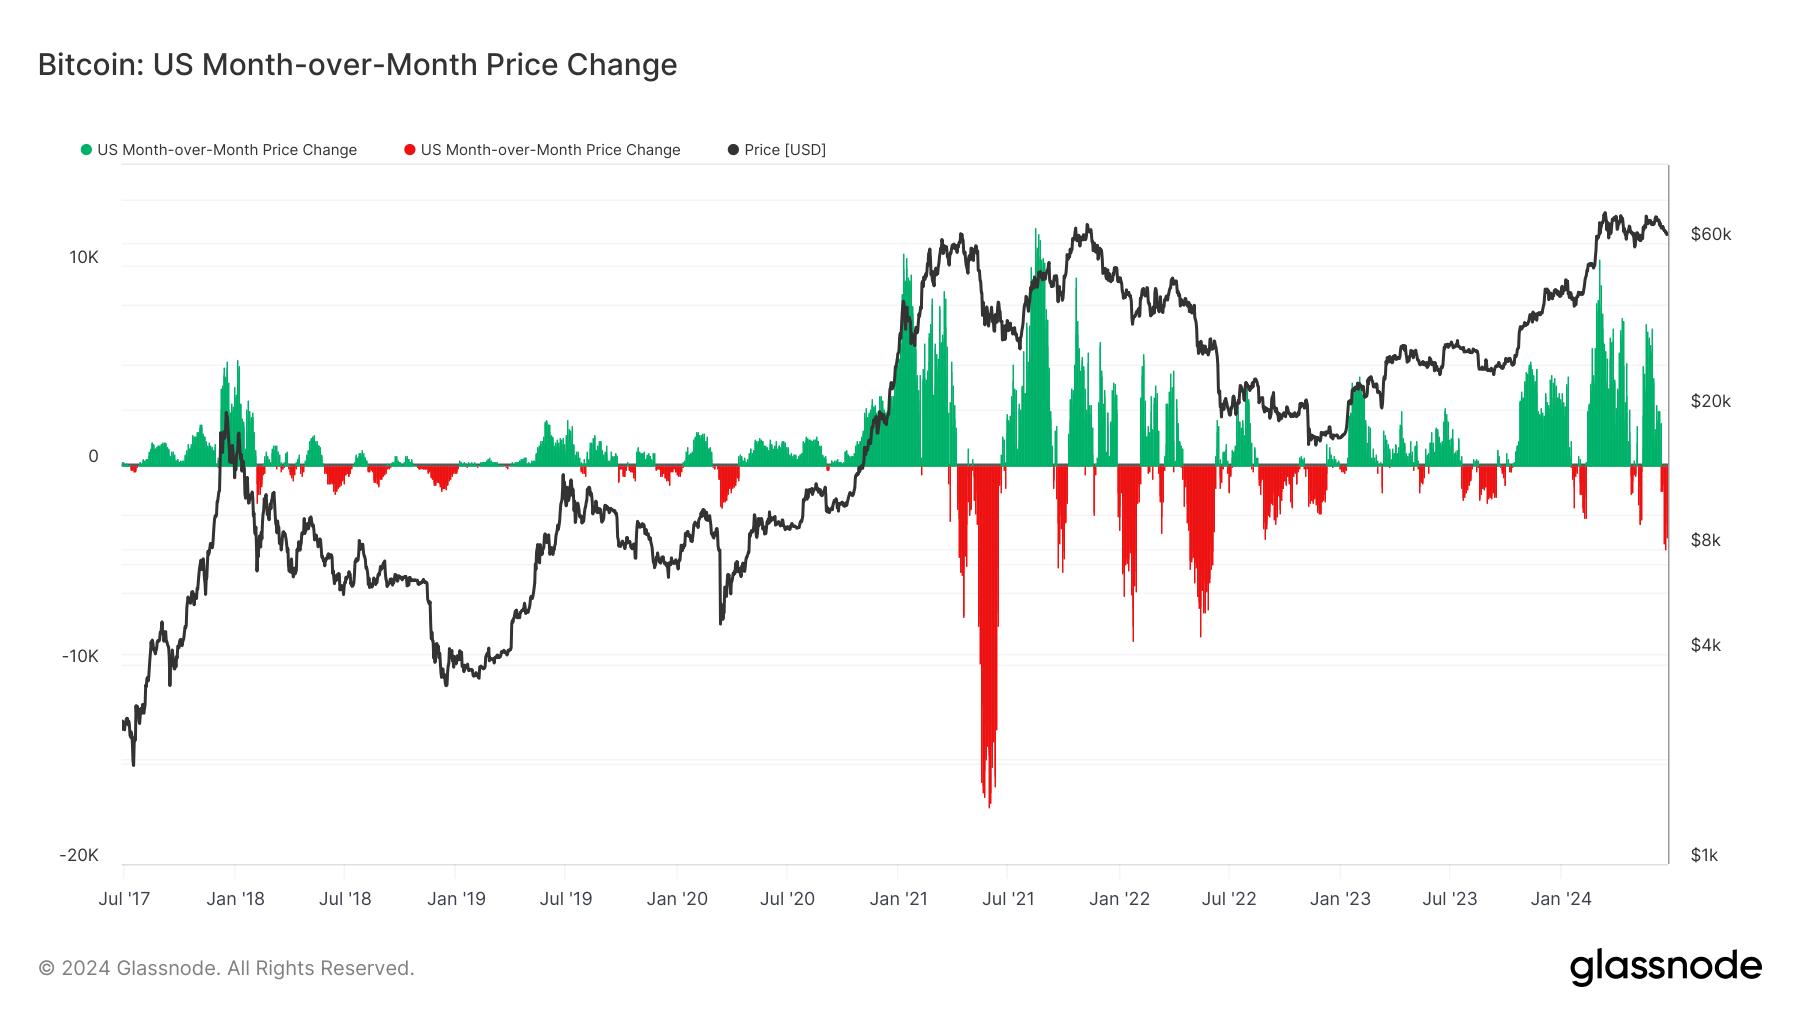 Bitcoin: US Month-over-Month Price Change: (Source: Glassnode)